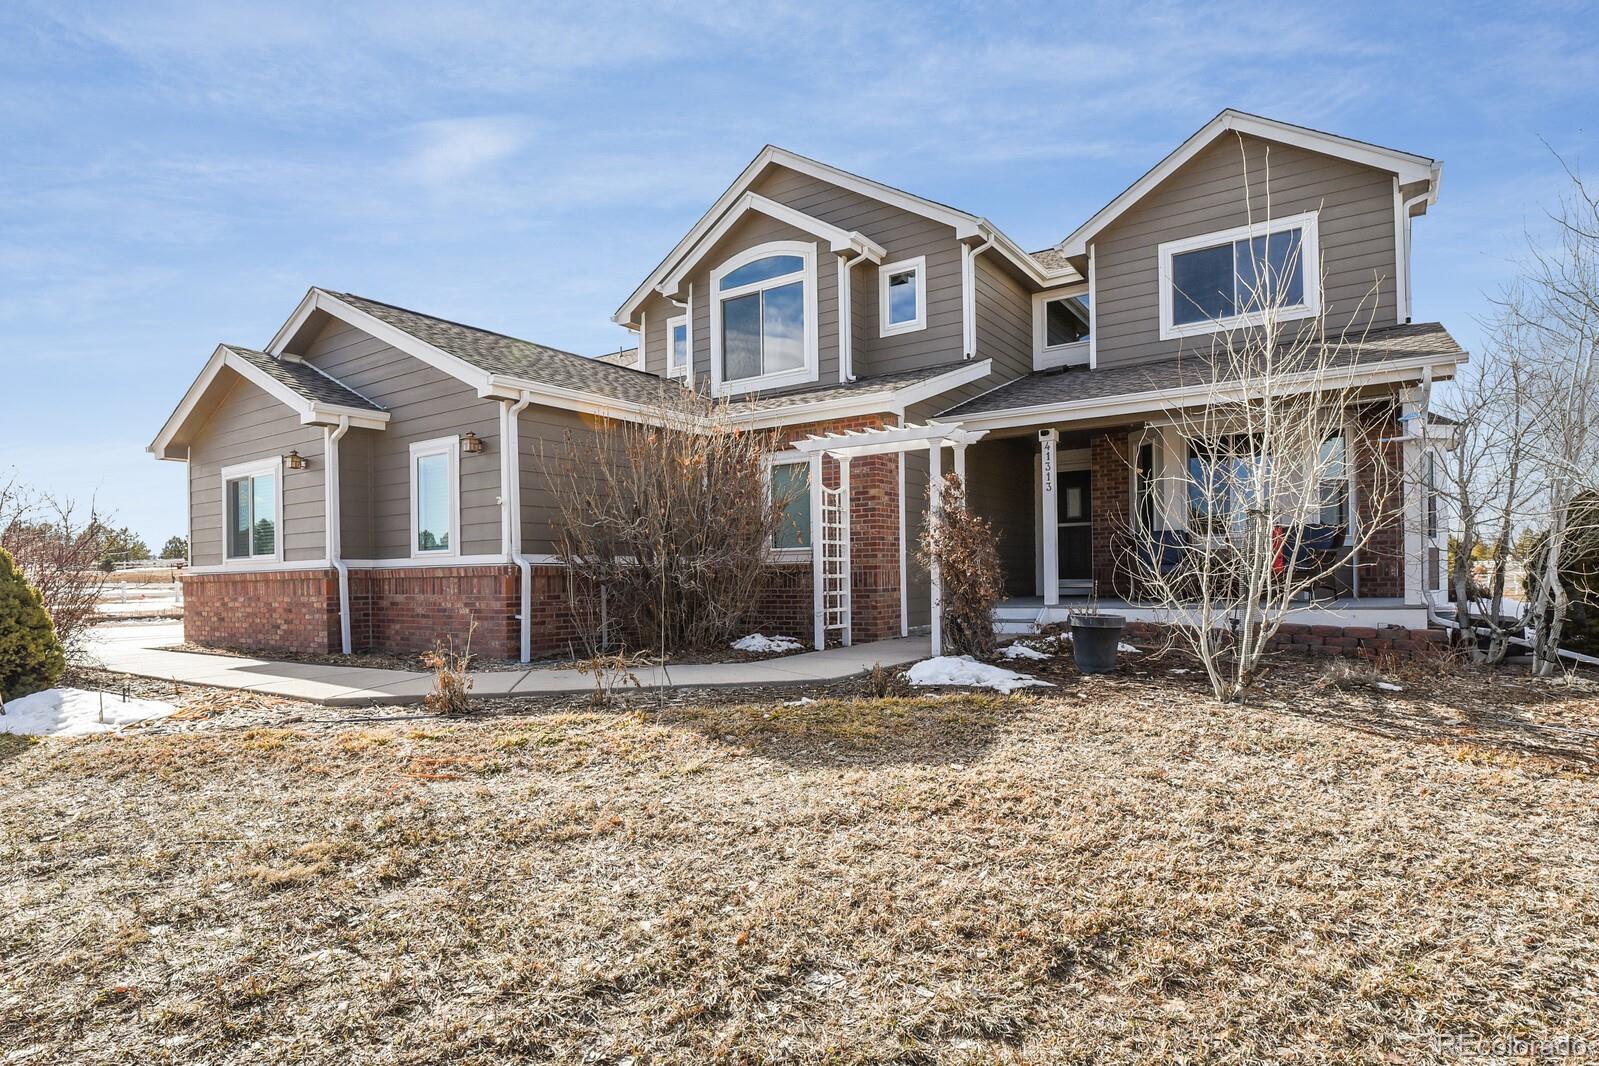 41313 s pinefield circle, Parker sold home. Closed on 2024-03-14 for $1,155,000.